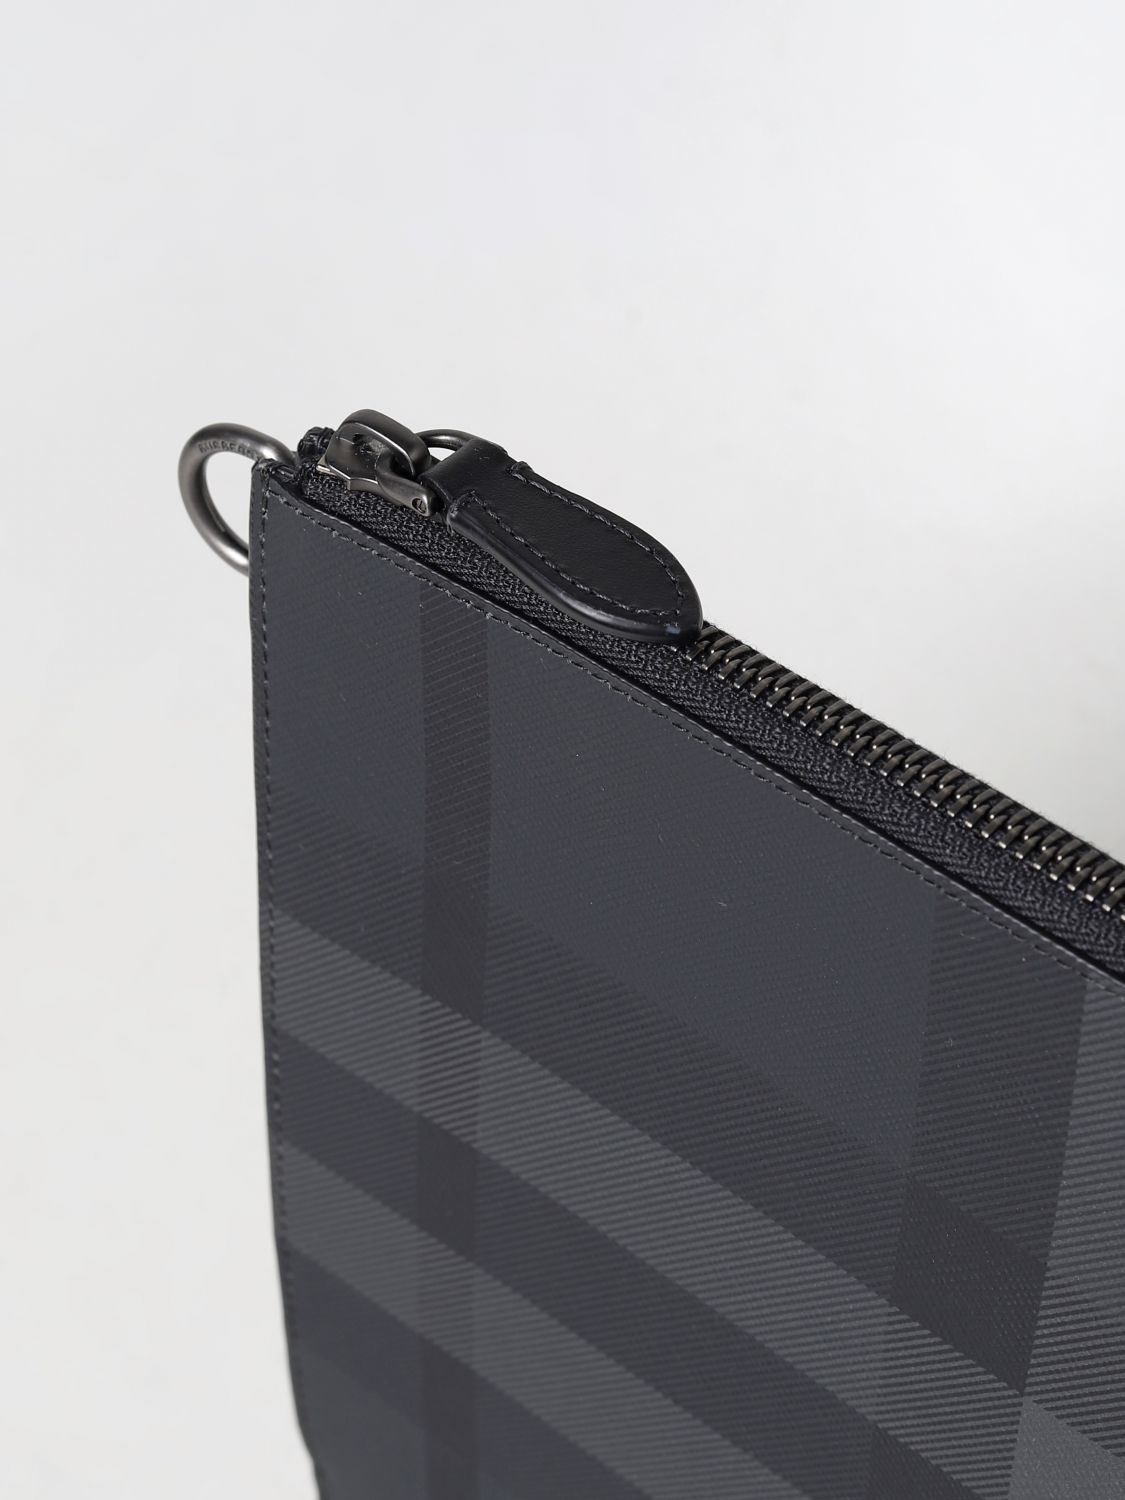 Burberry Flint pochette in saffiano coated fabric with Check pattern